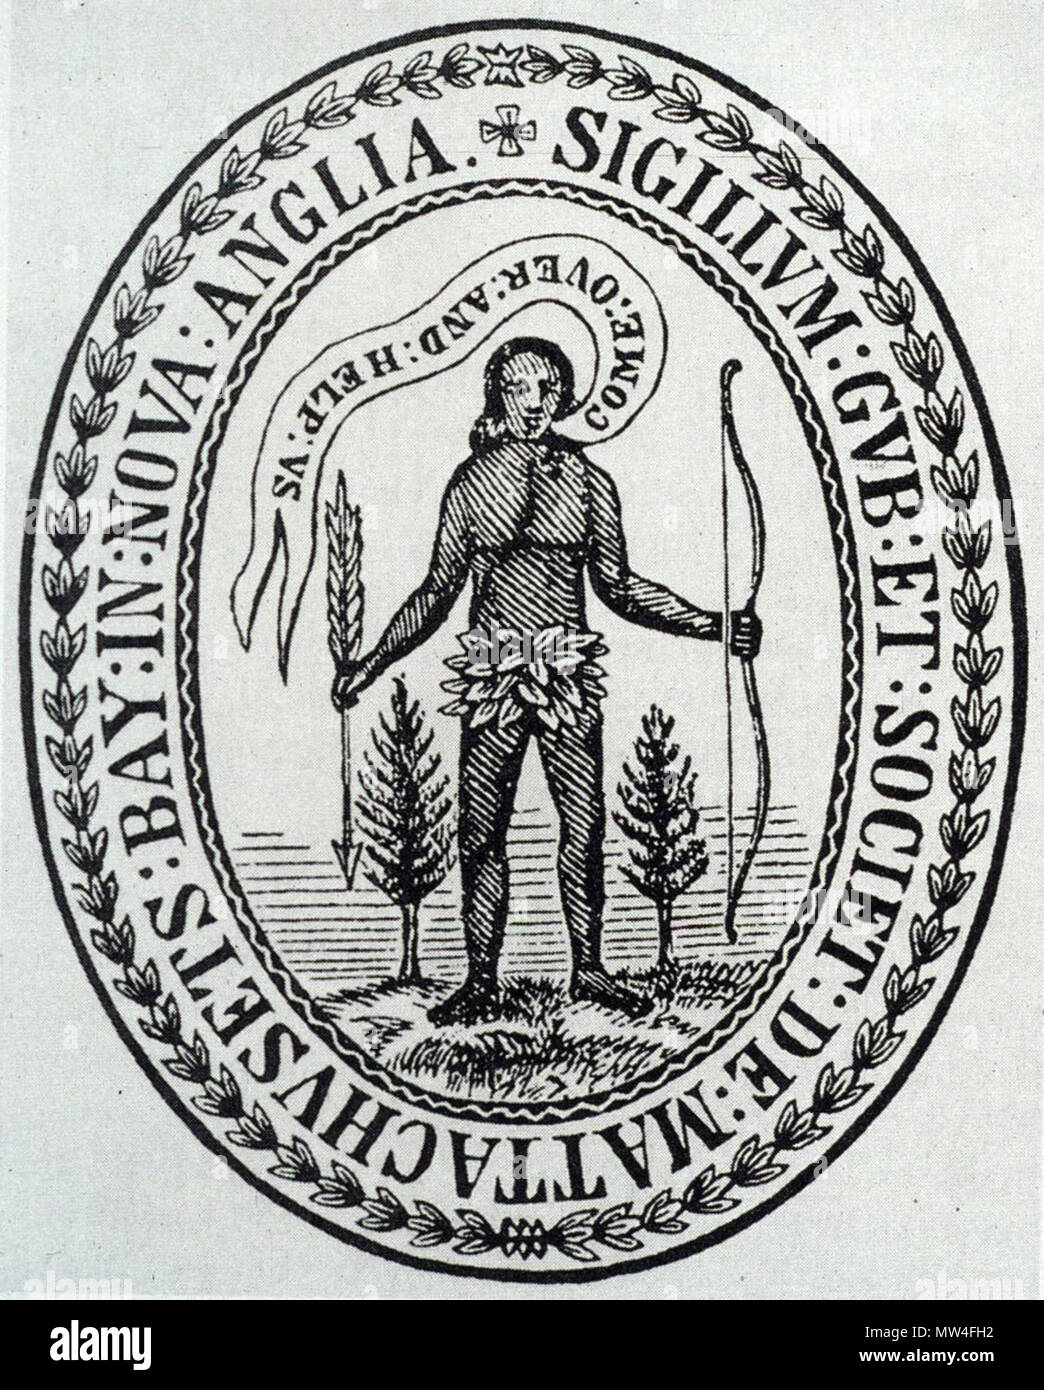 . English: Massachusetts Seal: In 1629, King Charles I granted a charter to the Massachusetts Bay Colony, which included the authority to make and use a seal. It featured an Indian holding an arrow pointed down in a gesture of peace, and the unlikely words 'Come over and help us,' emphasizing the missionary and commercial intentions of the original colonists. 28 November 2012, 06:28:08. Unknown 405 Massachusetts Bay Colony Seal, 1629 Stock Photo